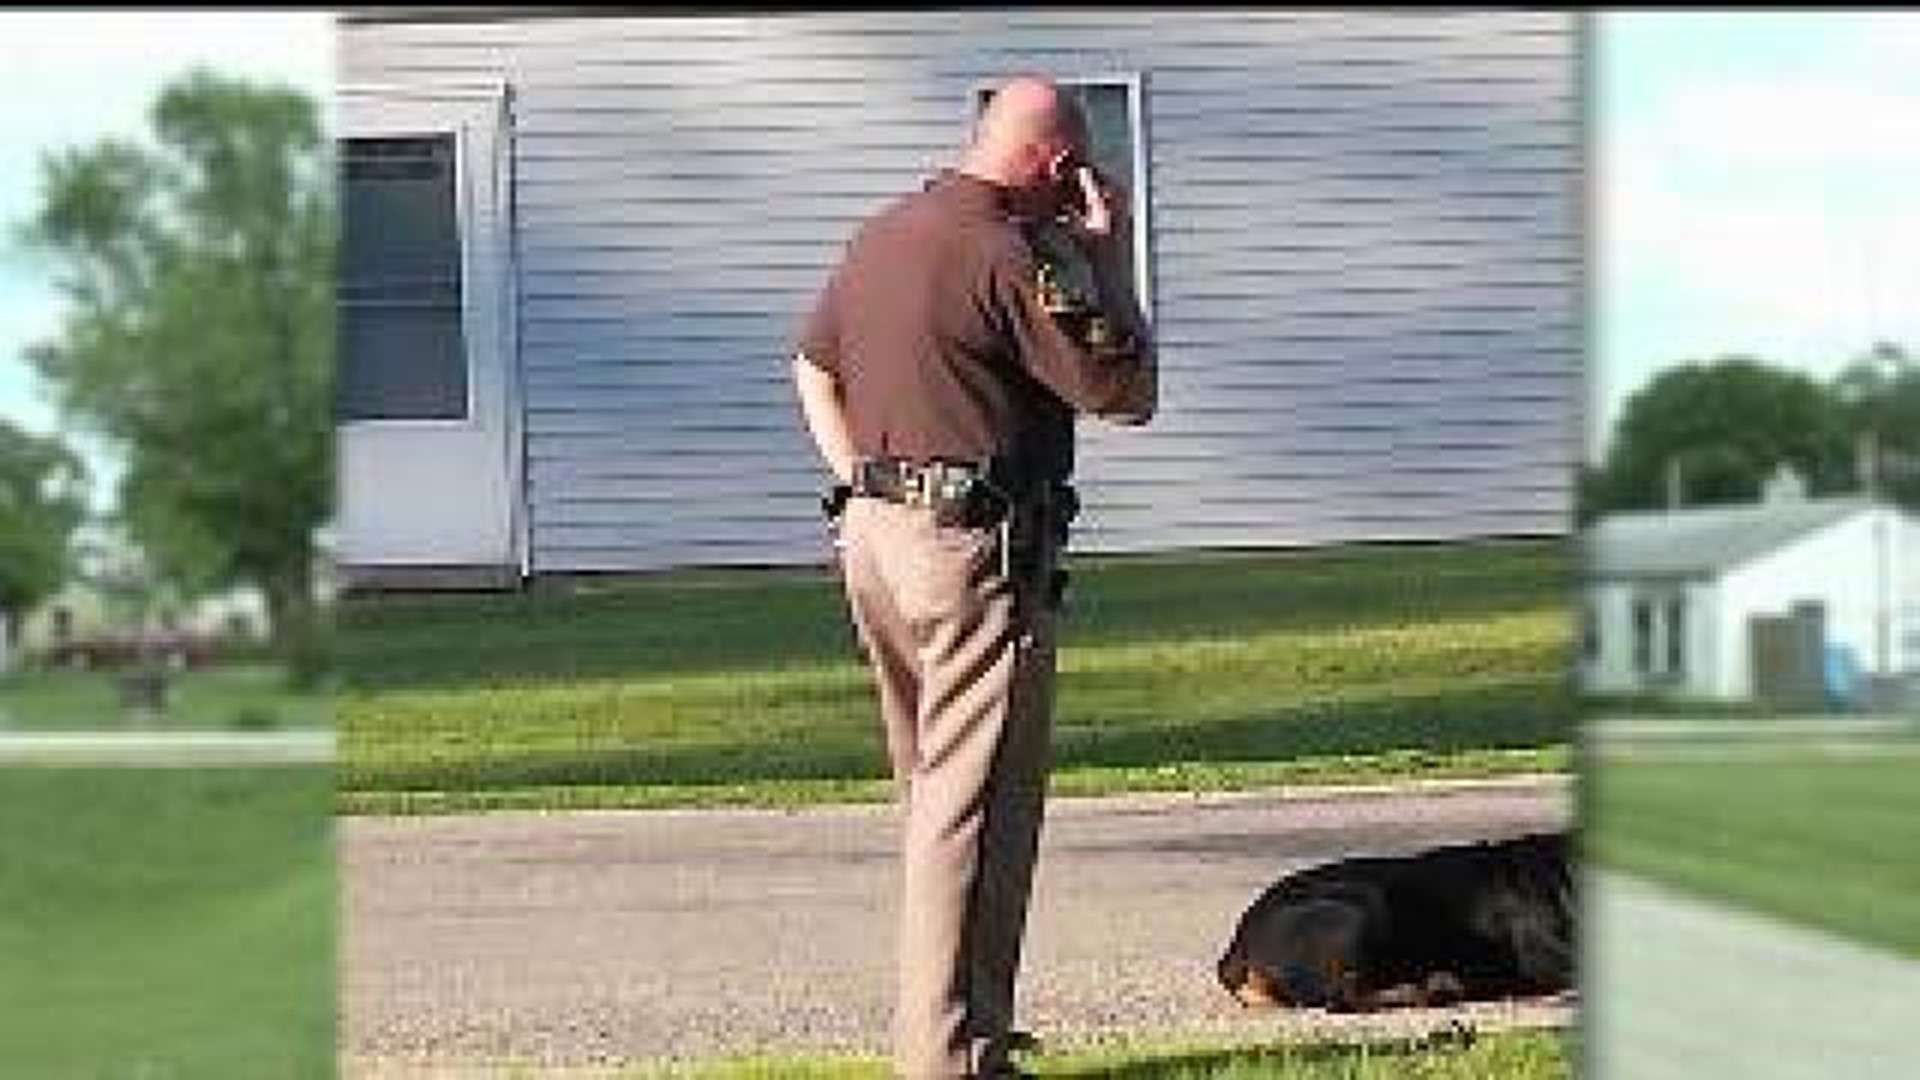 Case closed in death of East Moline dog